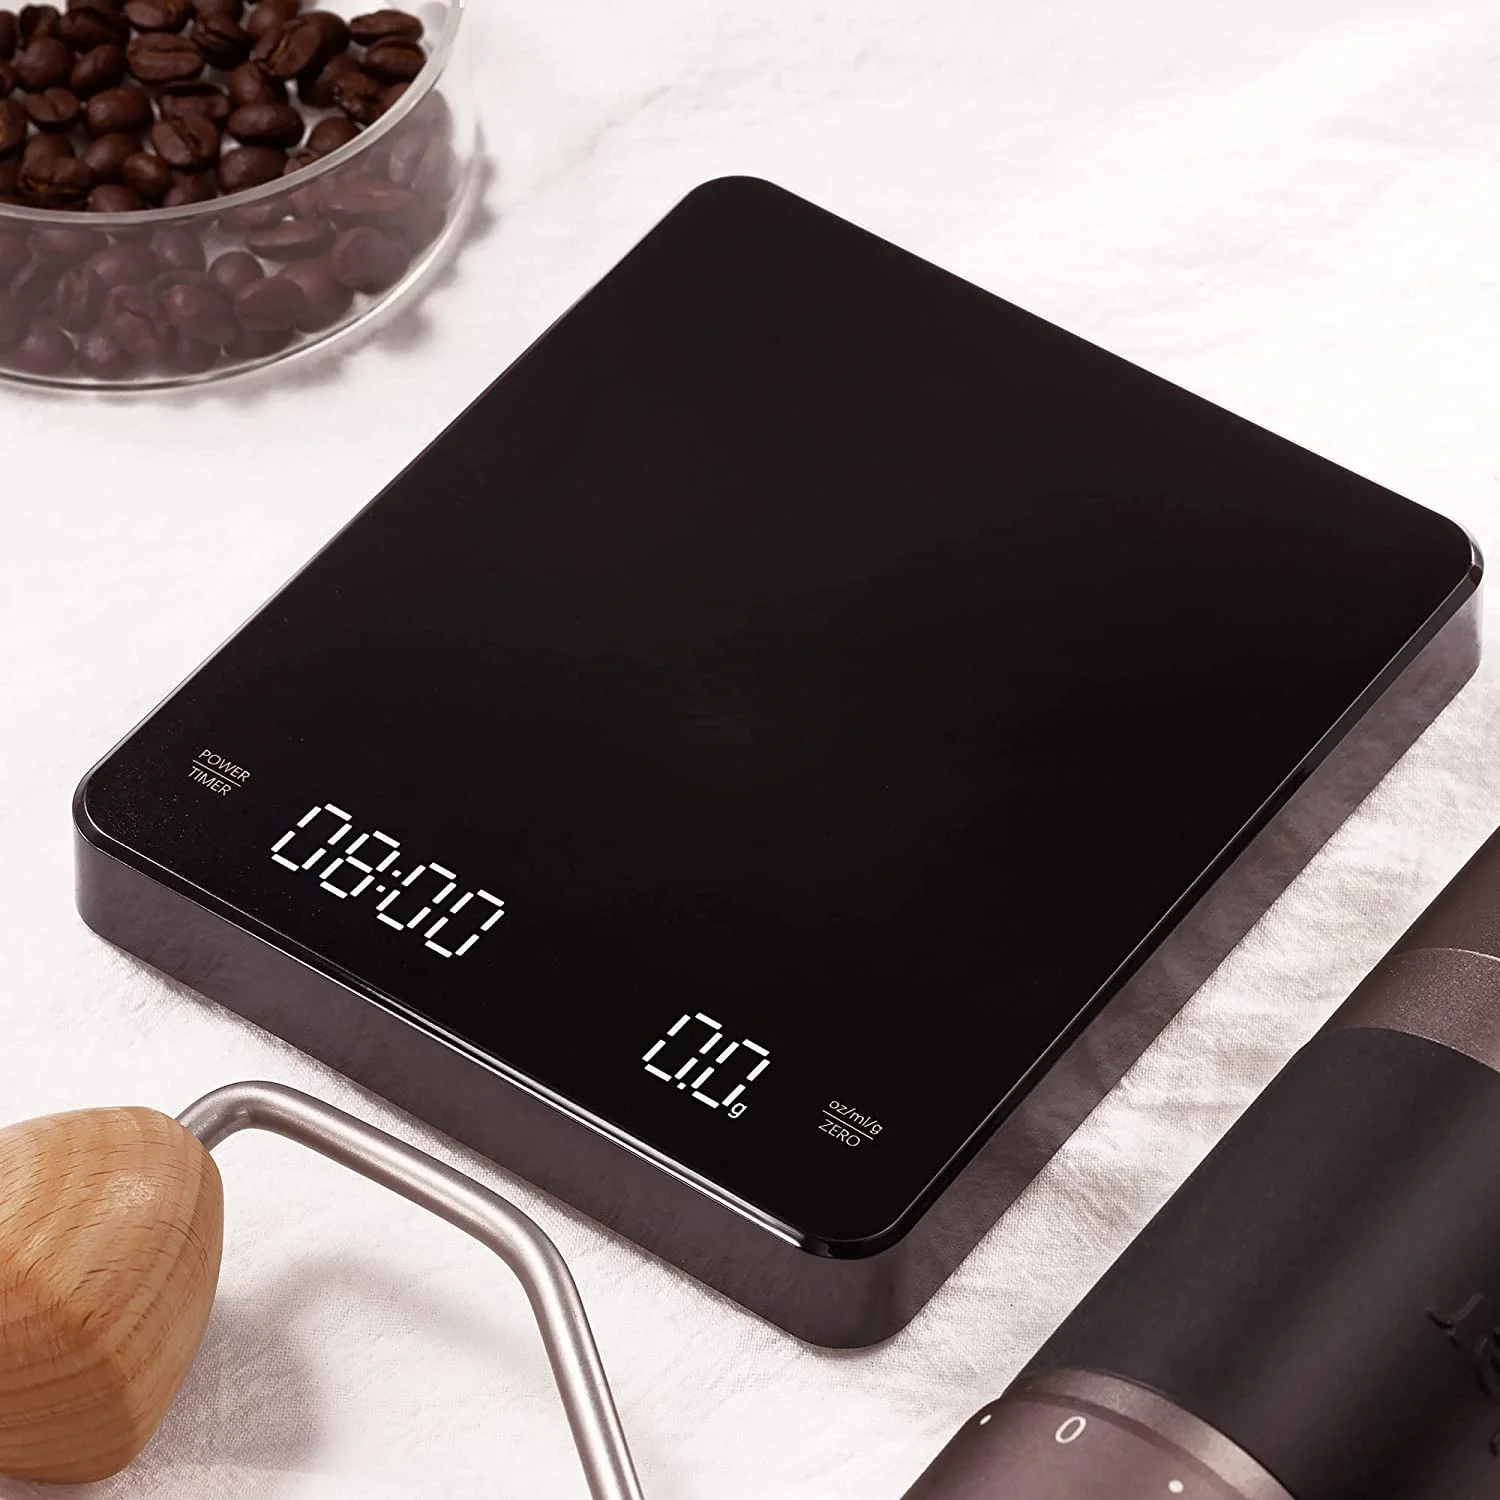 Top Sale Black Mini Kitchen Digital Coffee Scale with Timer